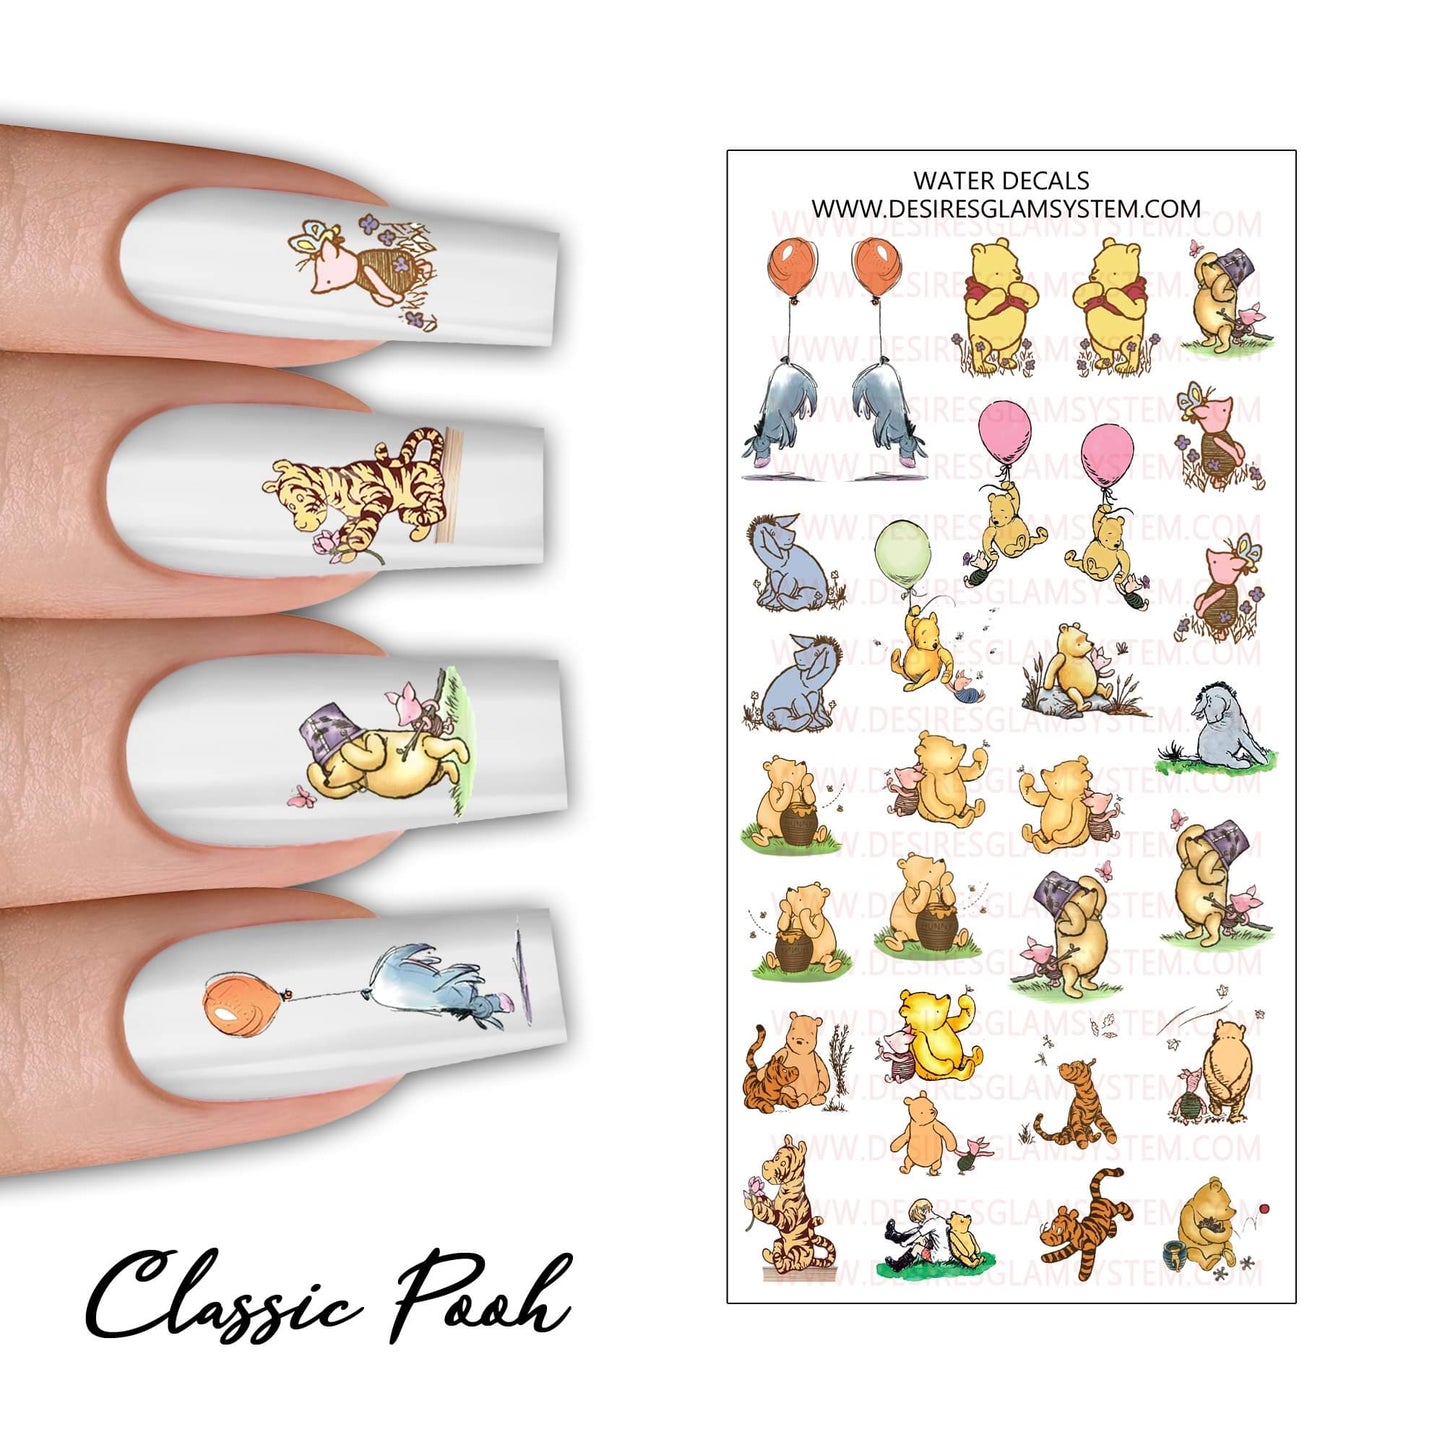 Classic Pooh Water Decals